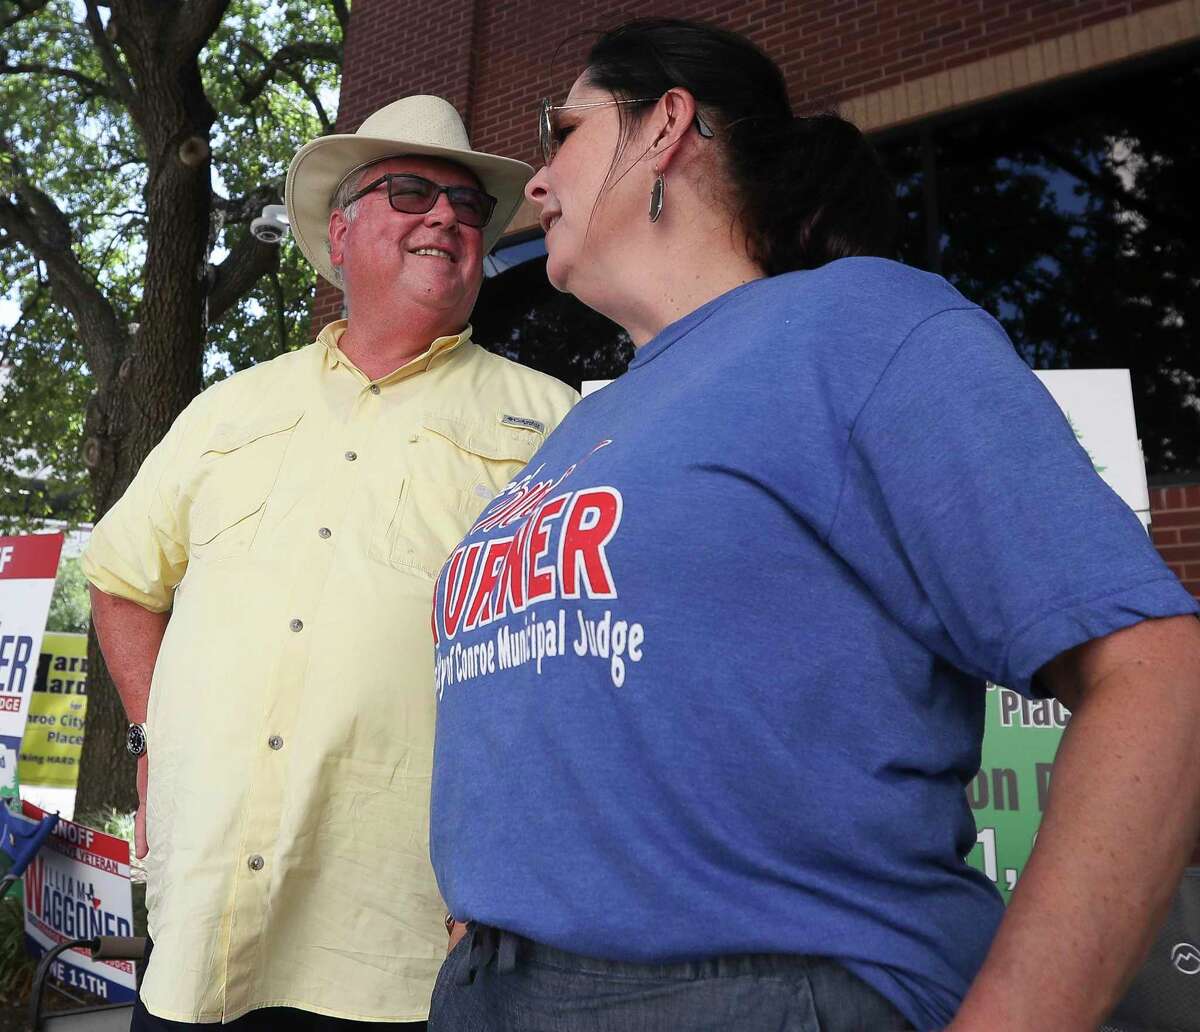 Harry Hardman, candidate for Conroe City Council Place 3, laughs with Meloney Turner, candidate for Conroe Municipal Judge, on Election Day, Saturday, June 11, 2022, in Conroe.